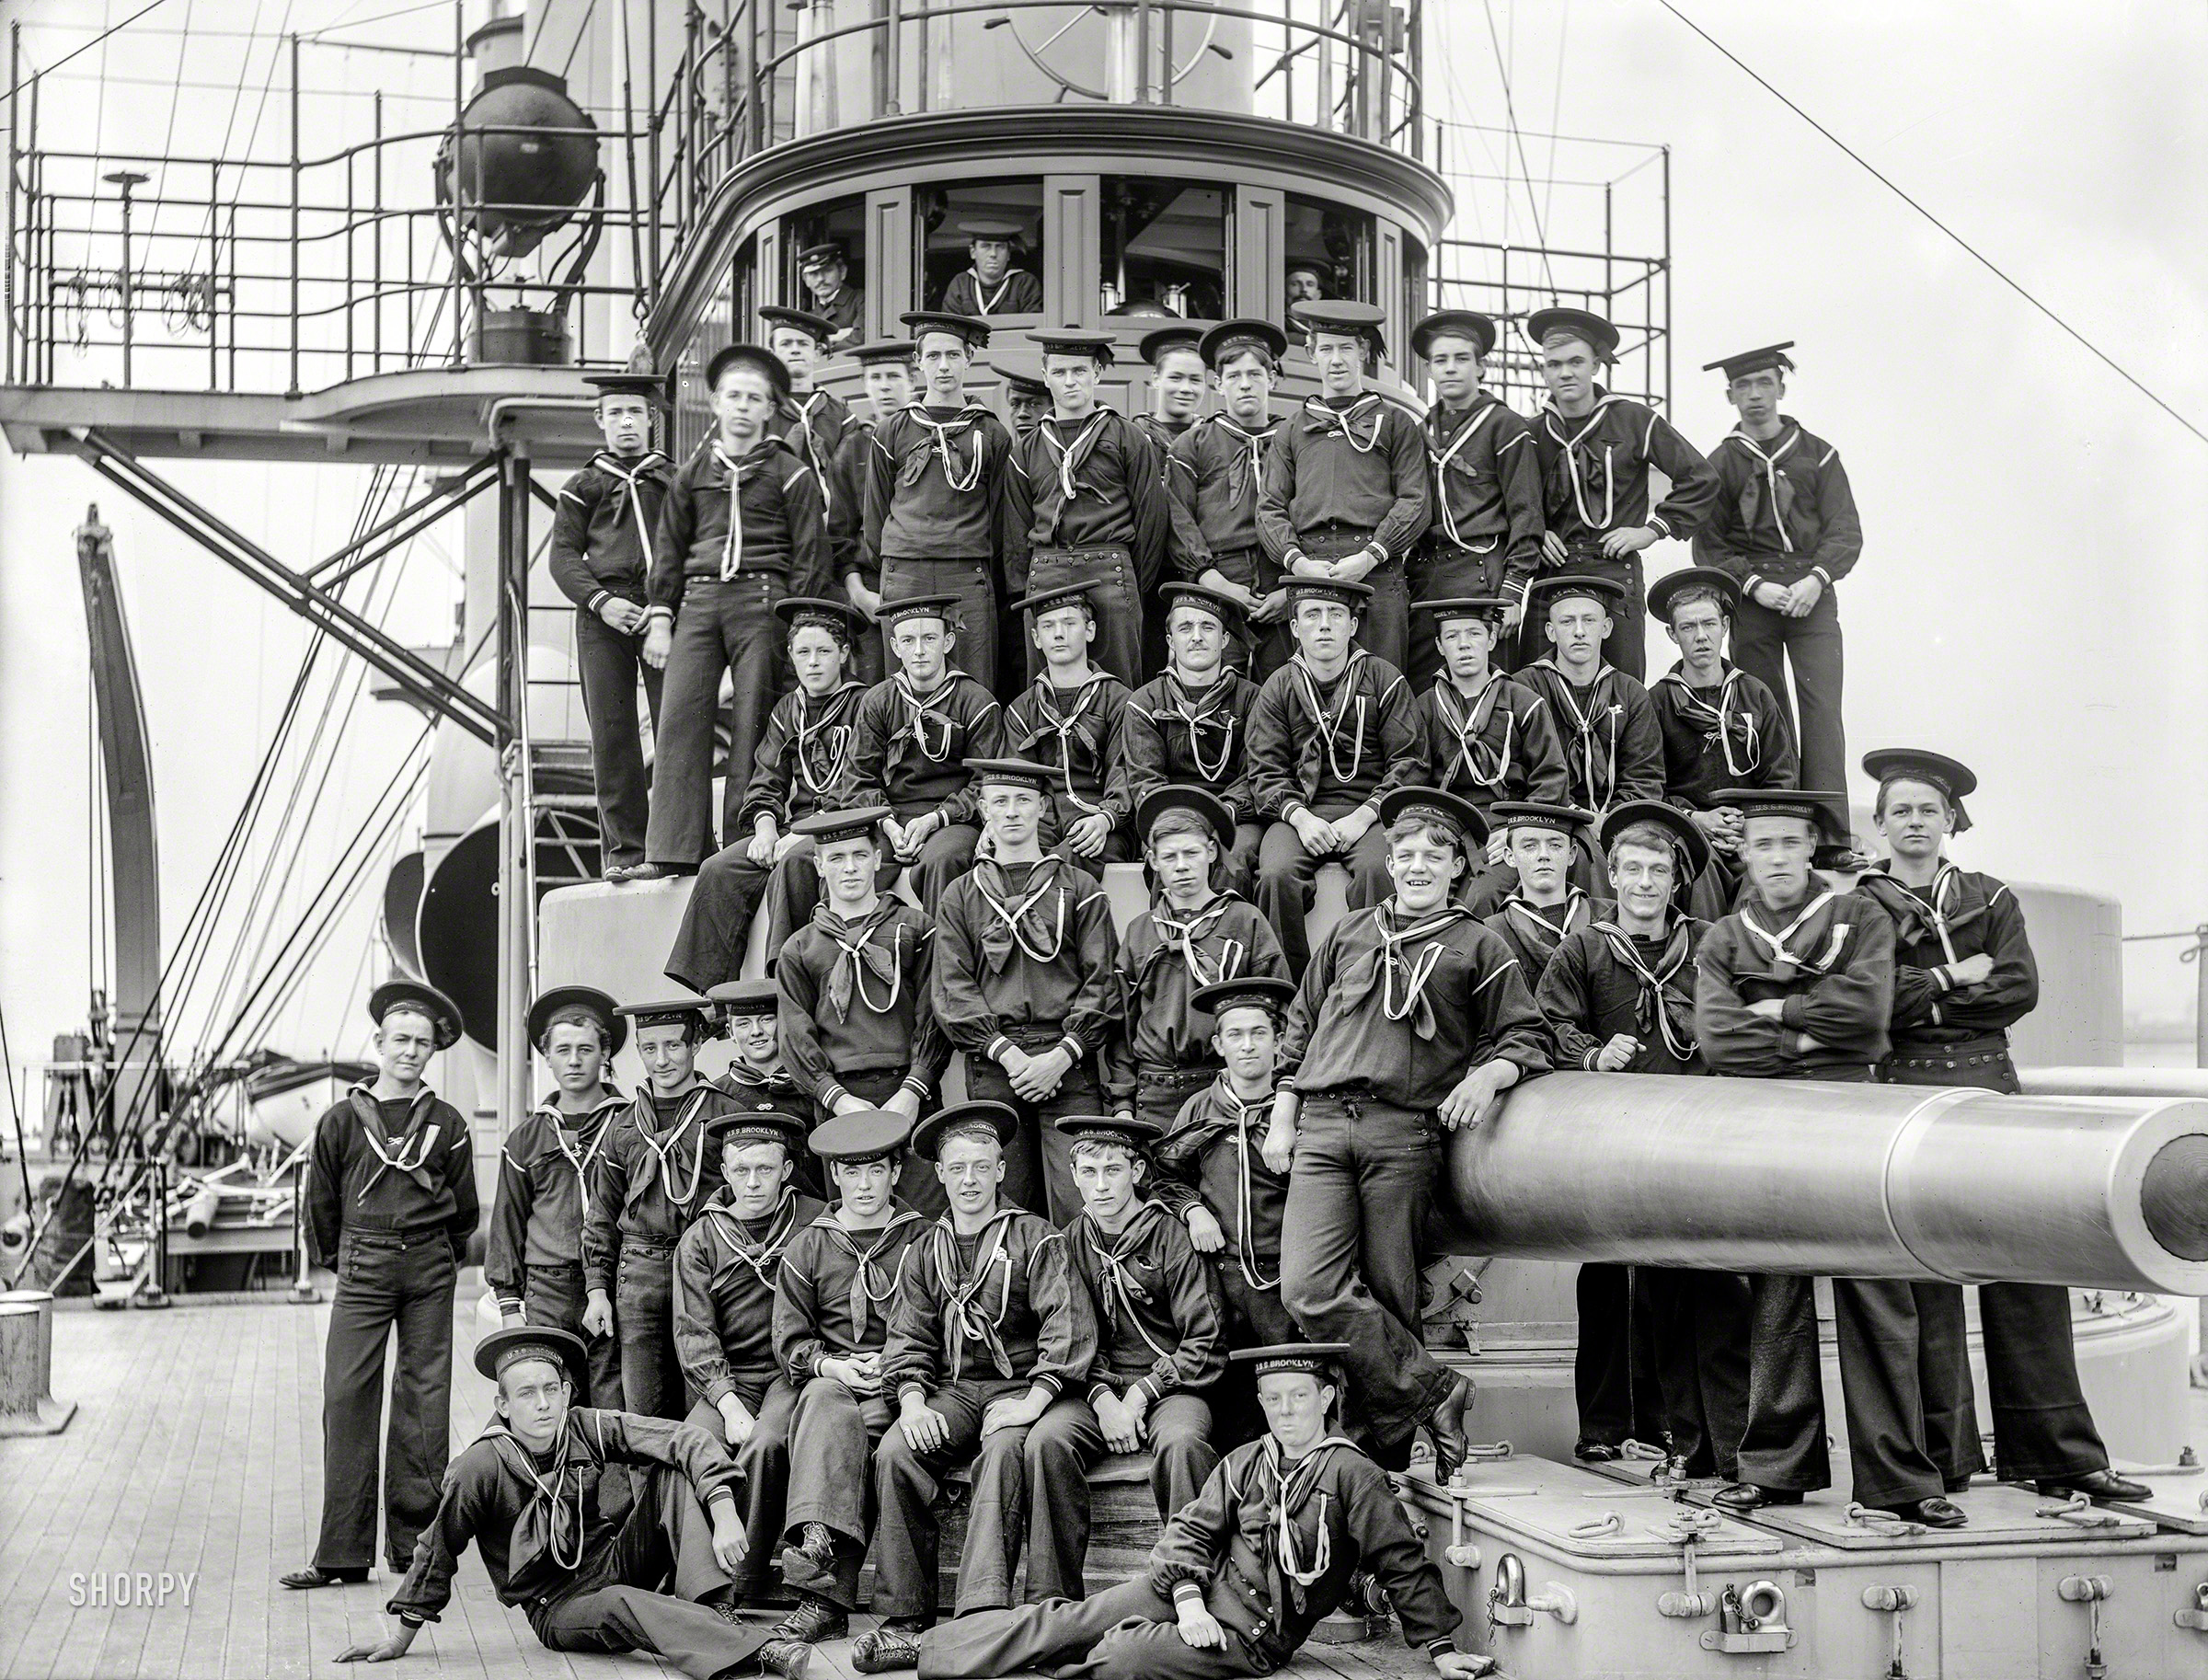 Circa 1897. "U.S.S. Brooklyn apprentice boys." Just remember, sailors: Bronx up, Battery down. 8x10 inch glass negative by Edward H. Hart. View full size.